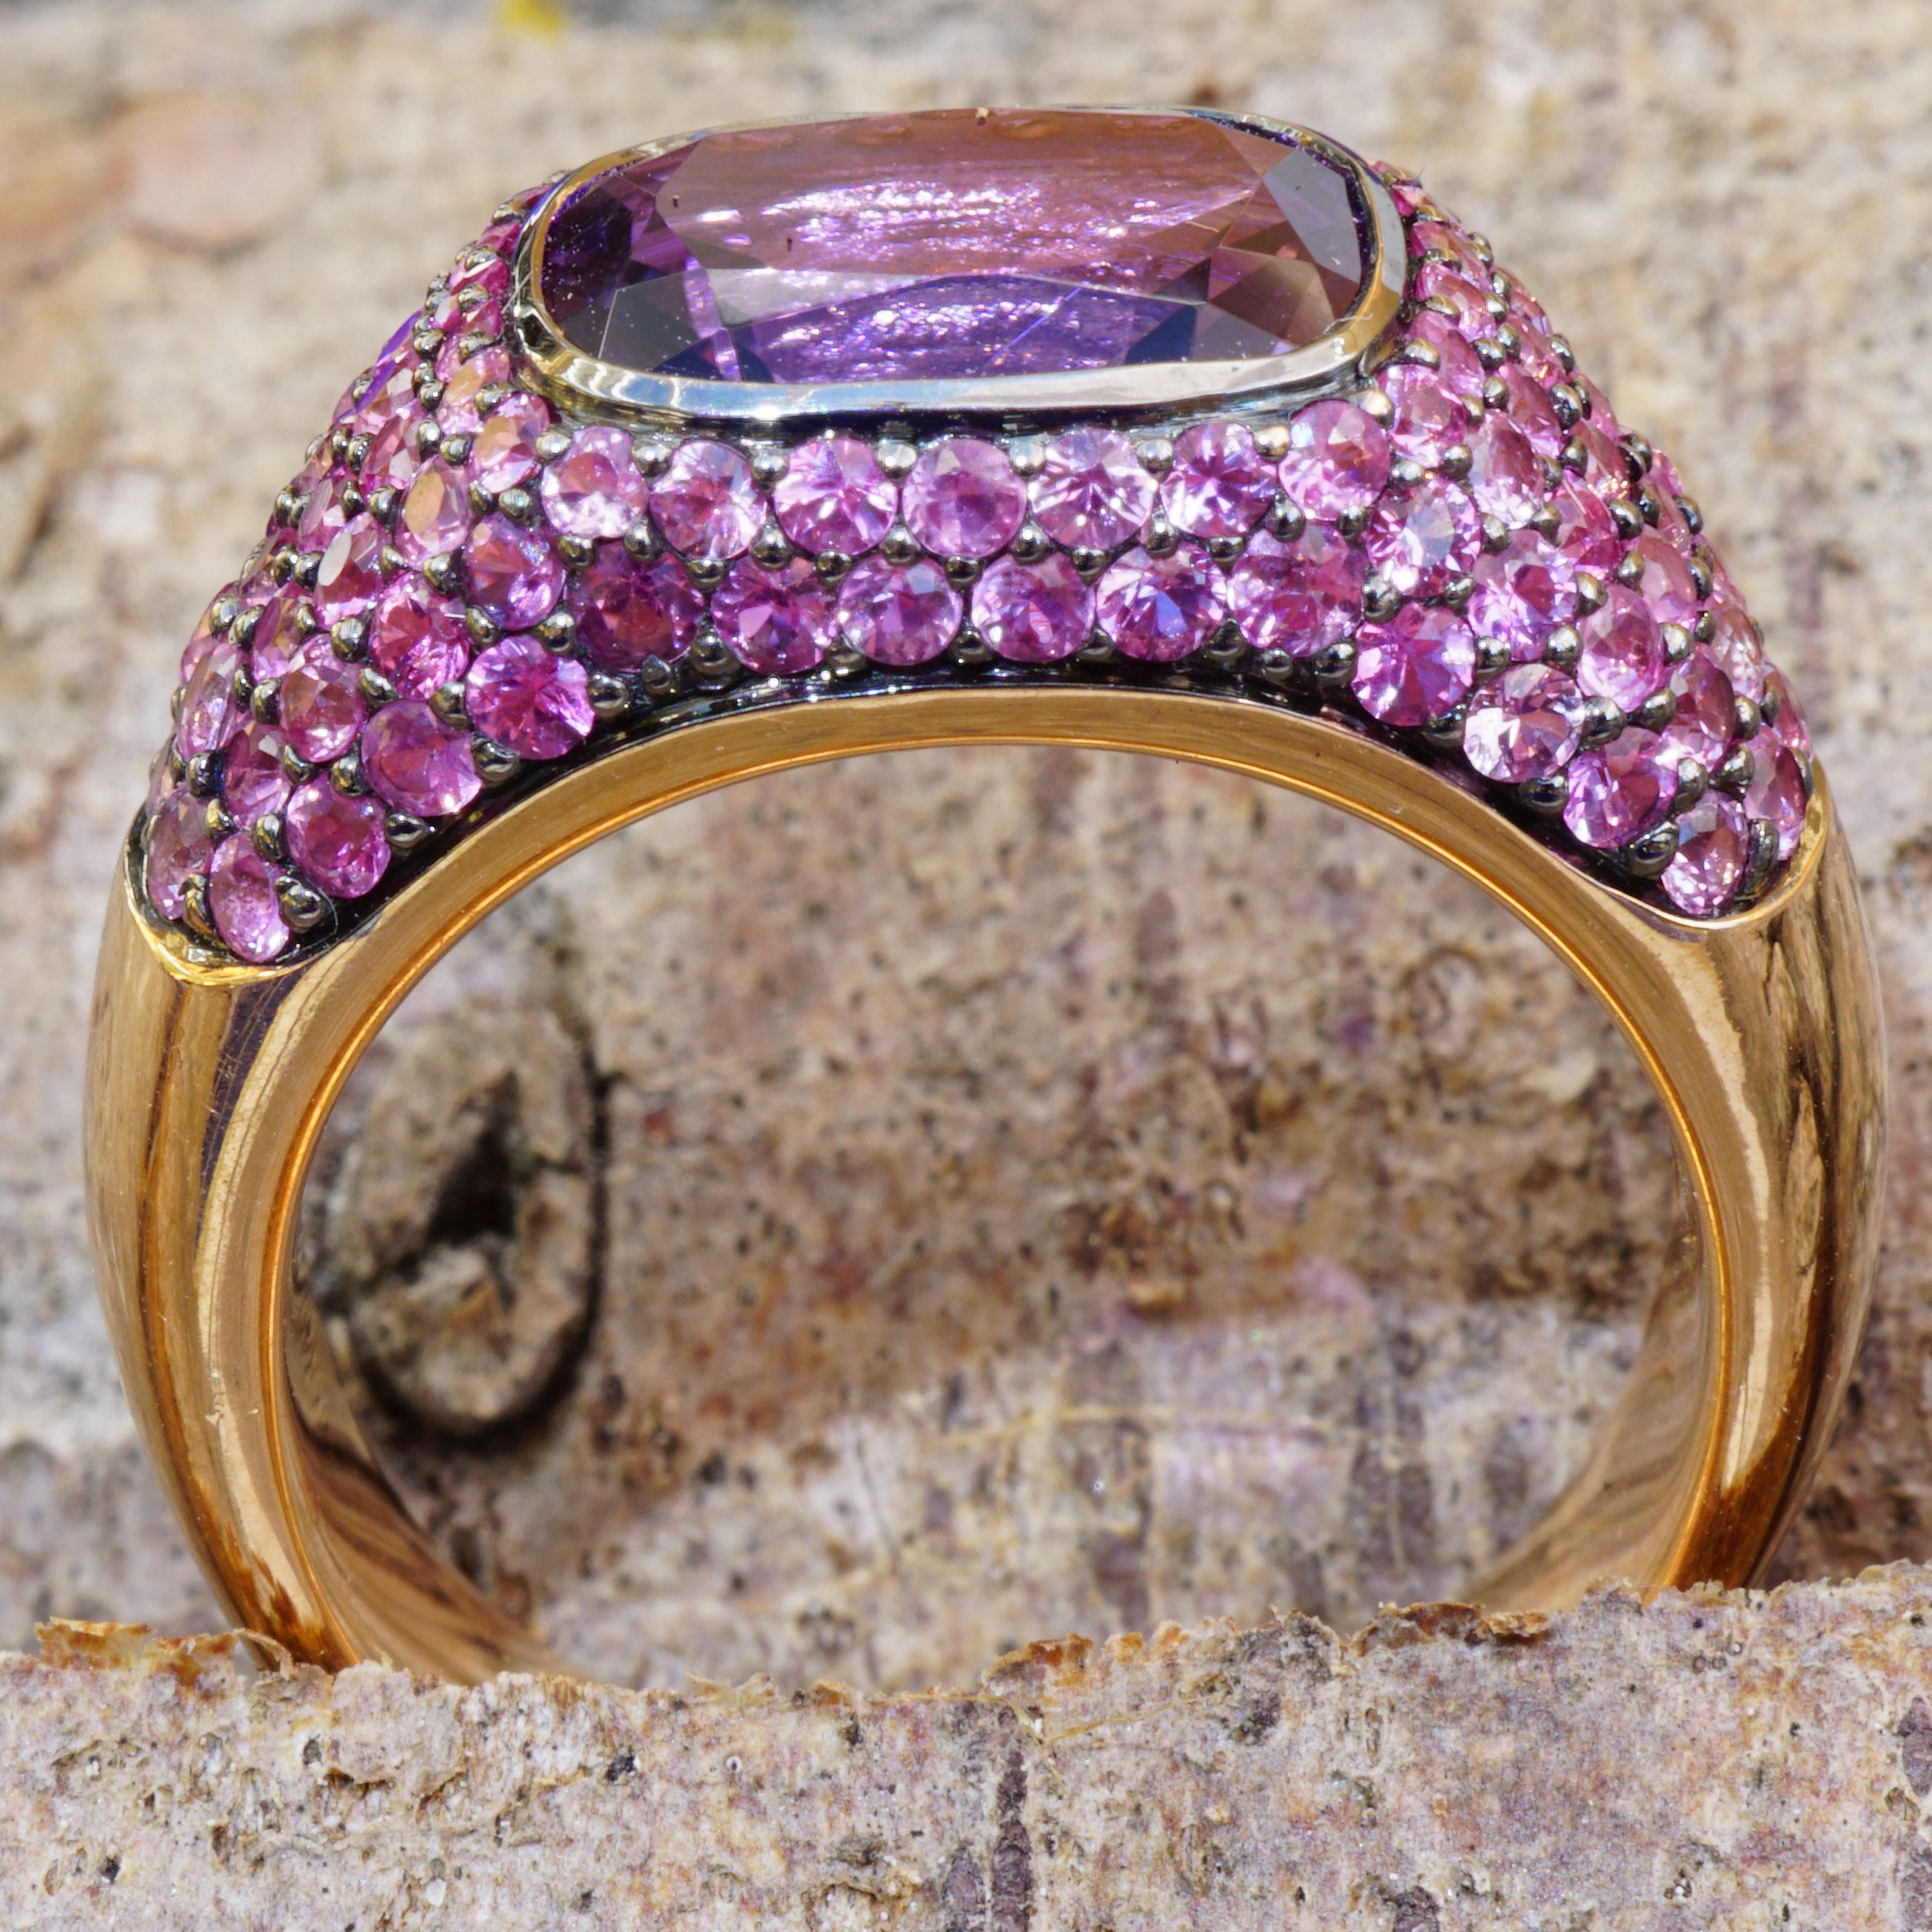 Amethyst-Saphir-Ring 18 Kt Roségold AAA+ Perfect Jewelers Art Made in Valenza im Angebot 2